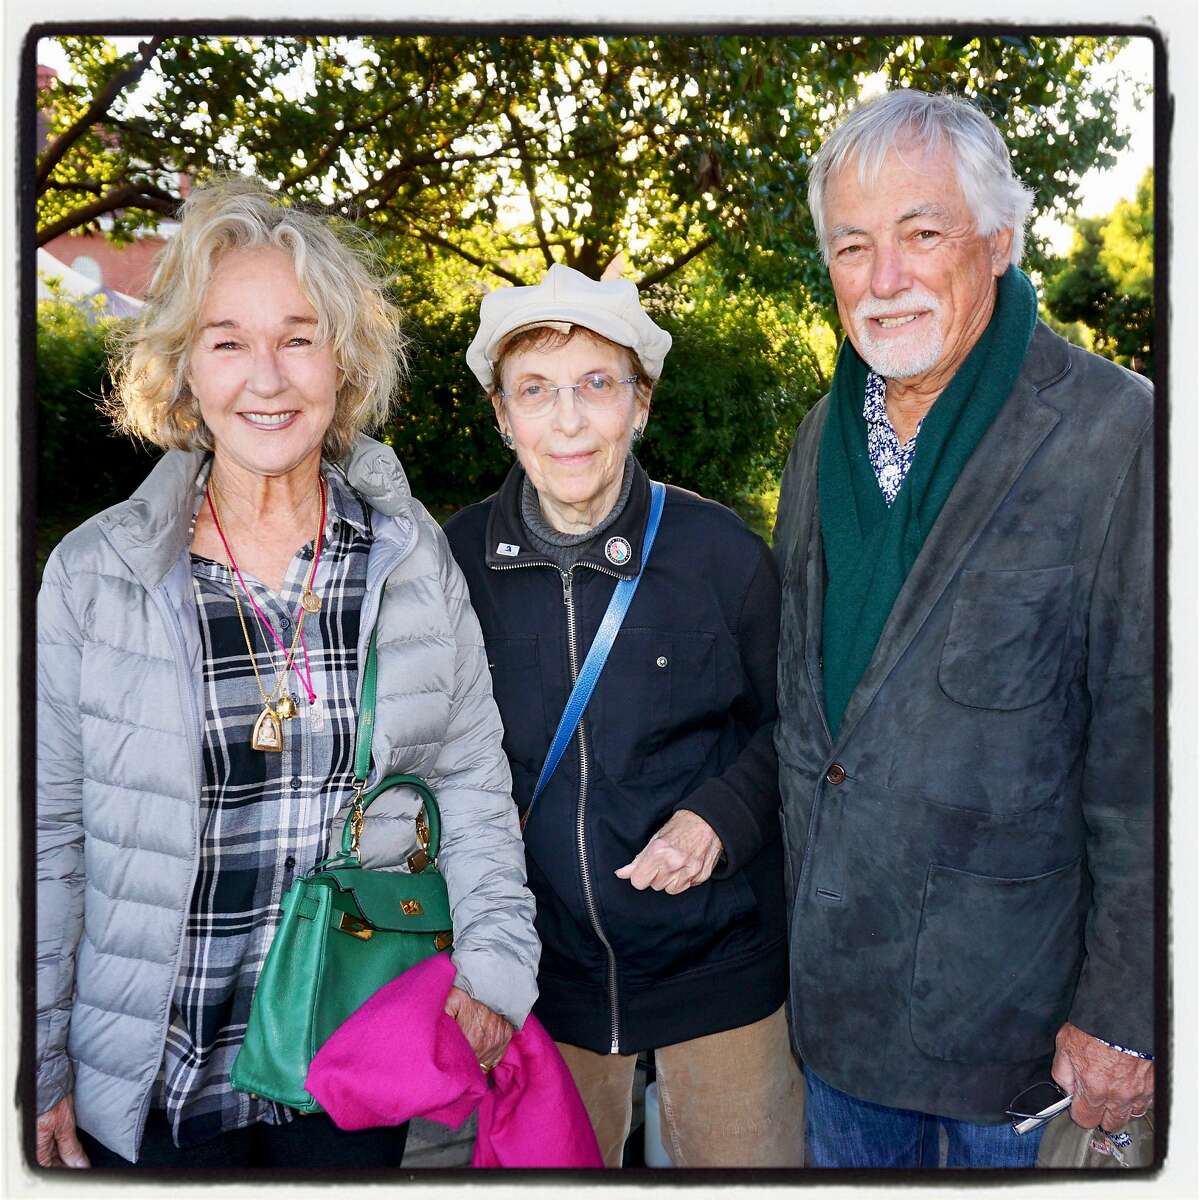 Susie Buell (left) with parks conservationist Amy Meyer and St. Mark of the Parks Buell at the Trails Forever Dinner. Sept. 23. 2017.